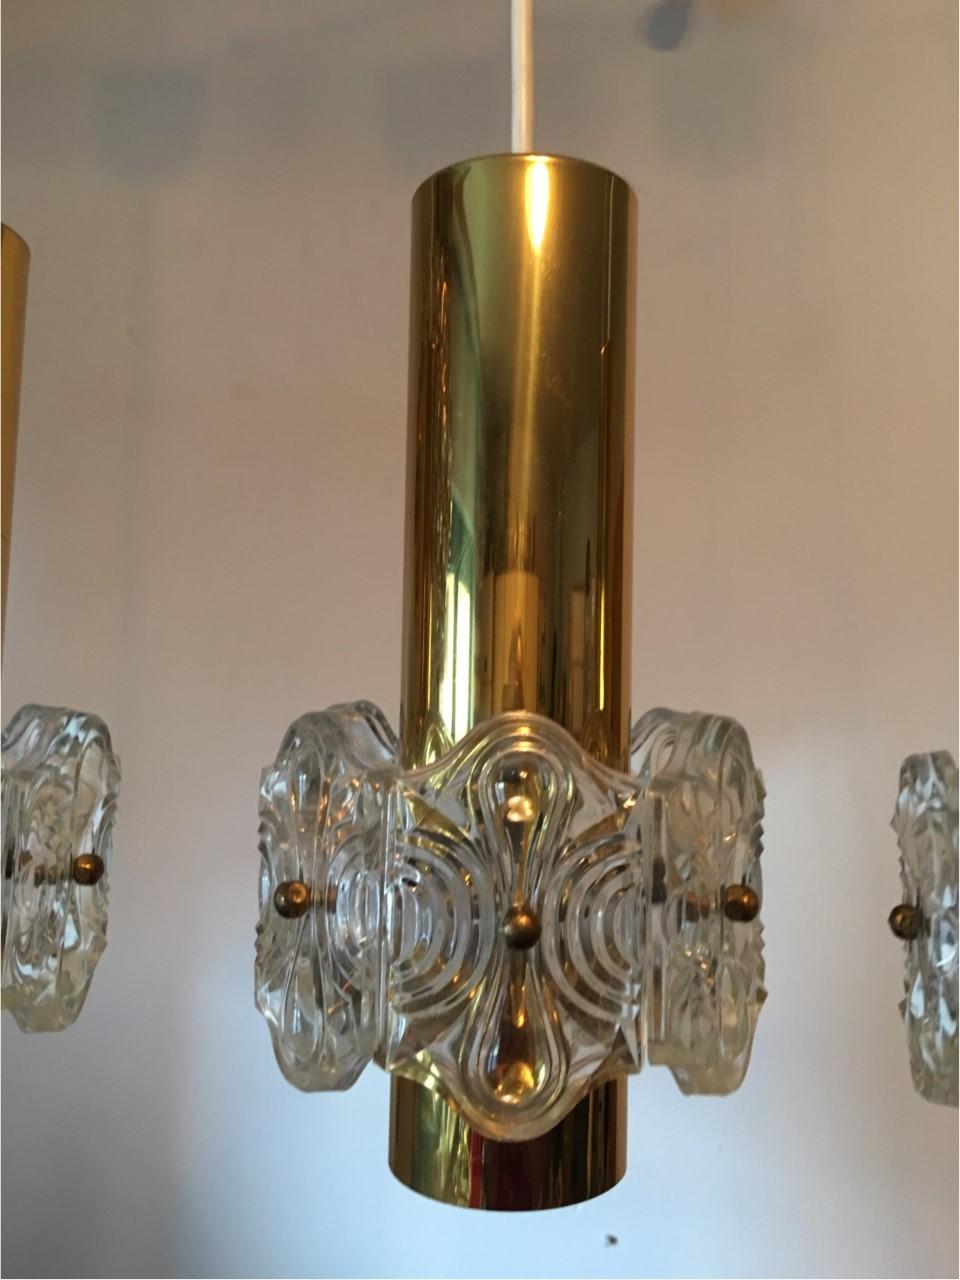 Three Round Brass and Glass Pendant Lamp In Good Condition For Sale In Frisco, TX